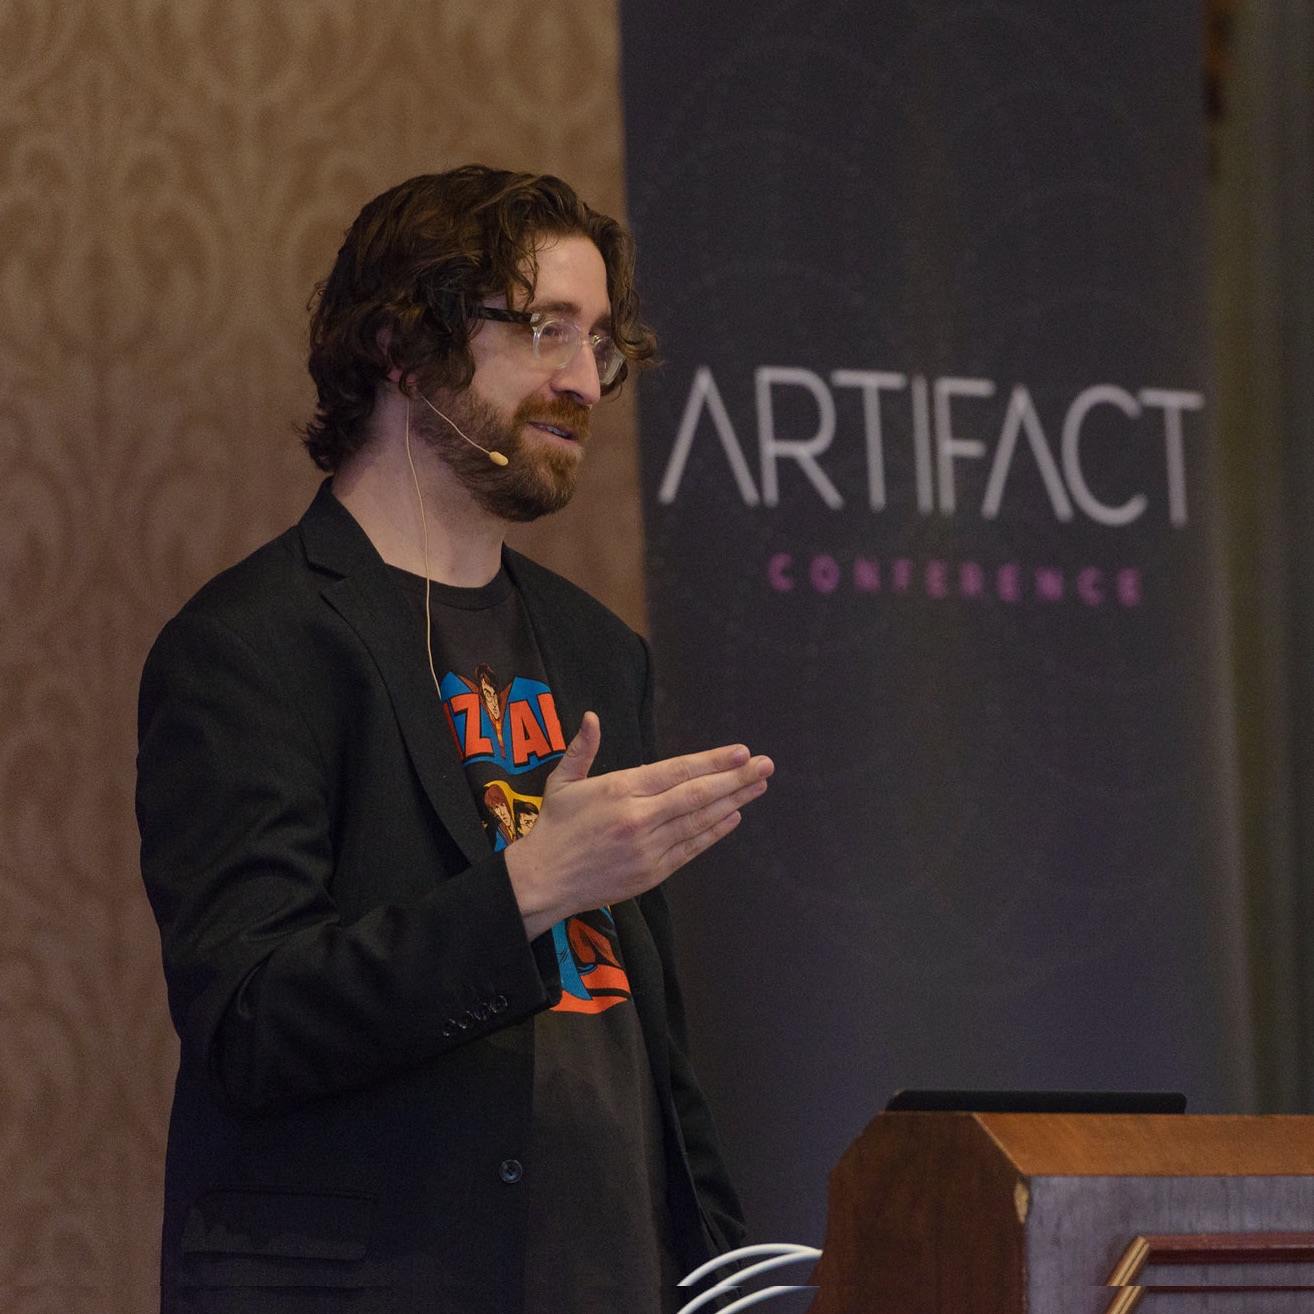 Christopher with speaking microphone on at Artifact Conf